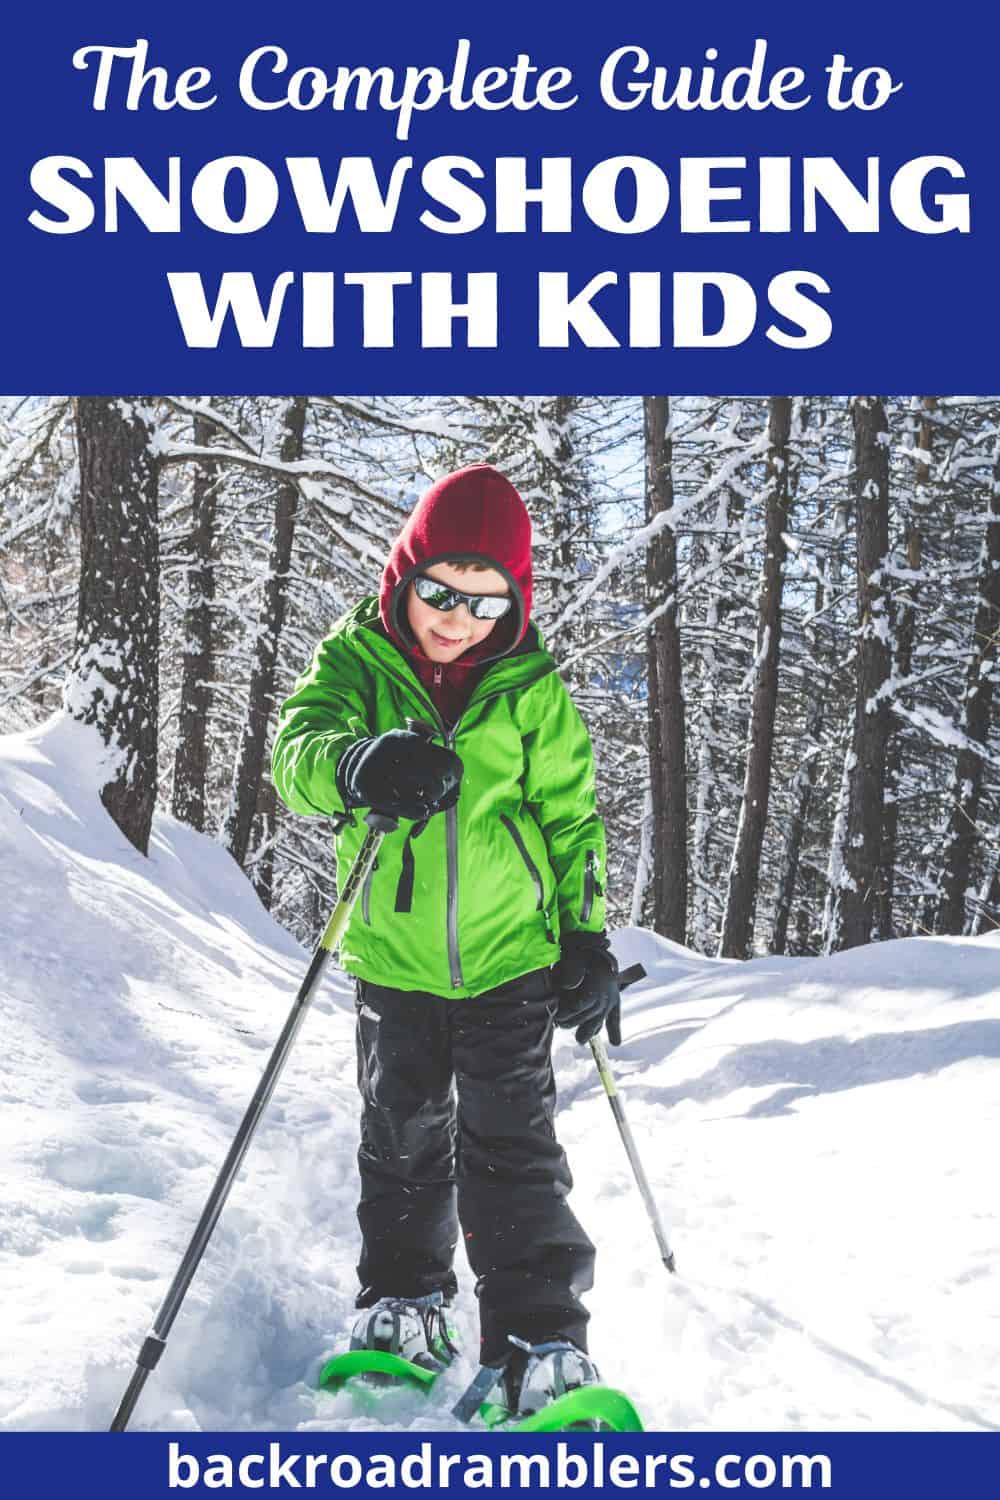 A boy walks through the snowy woods wearing a green jacket and snowshoes. Text overlay: The Complete Guide to Snowshoeing with Kids